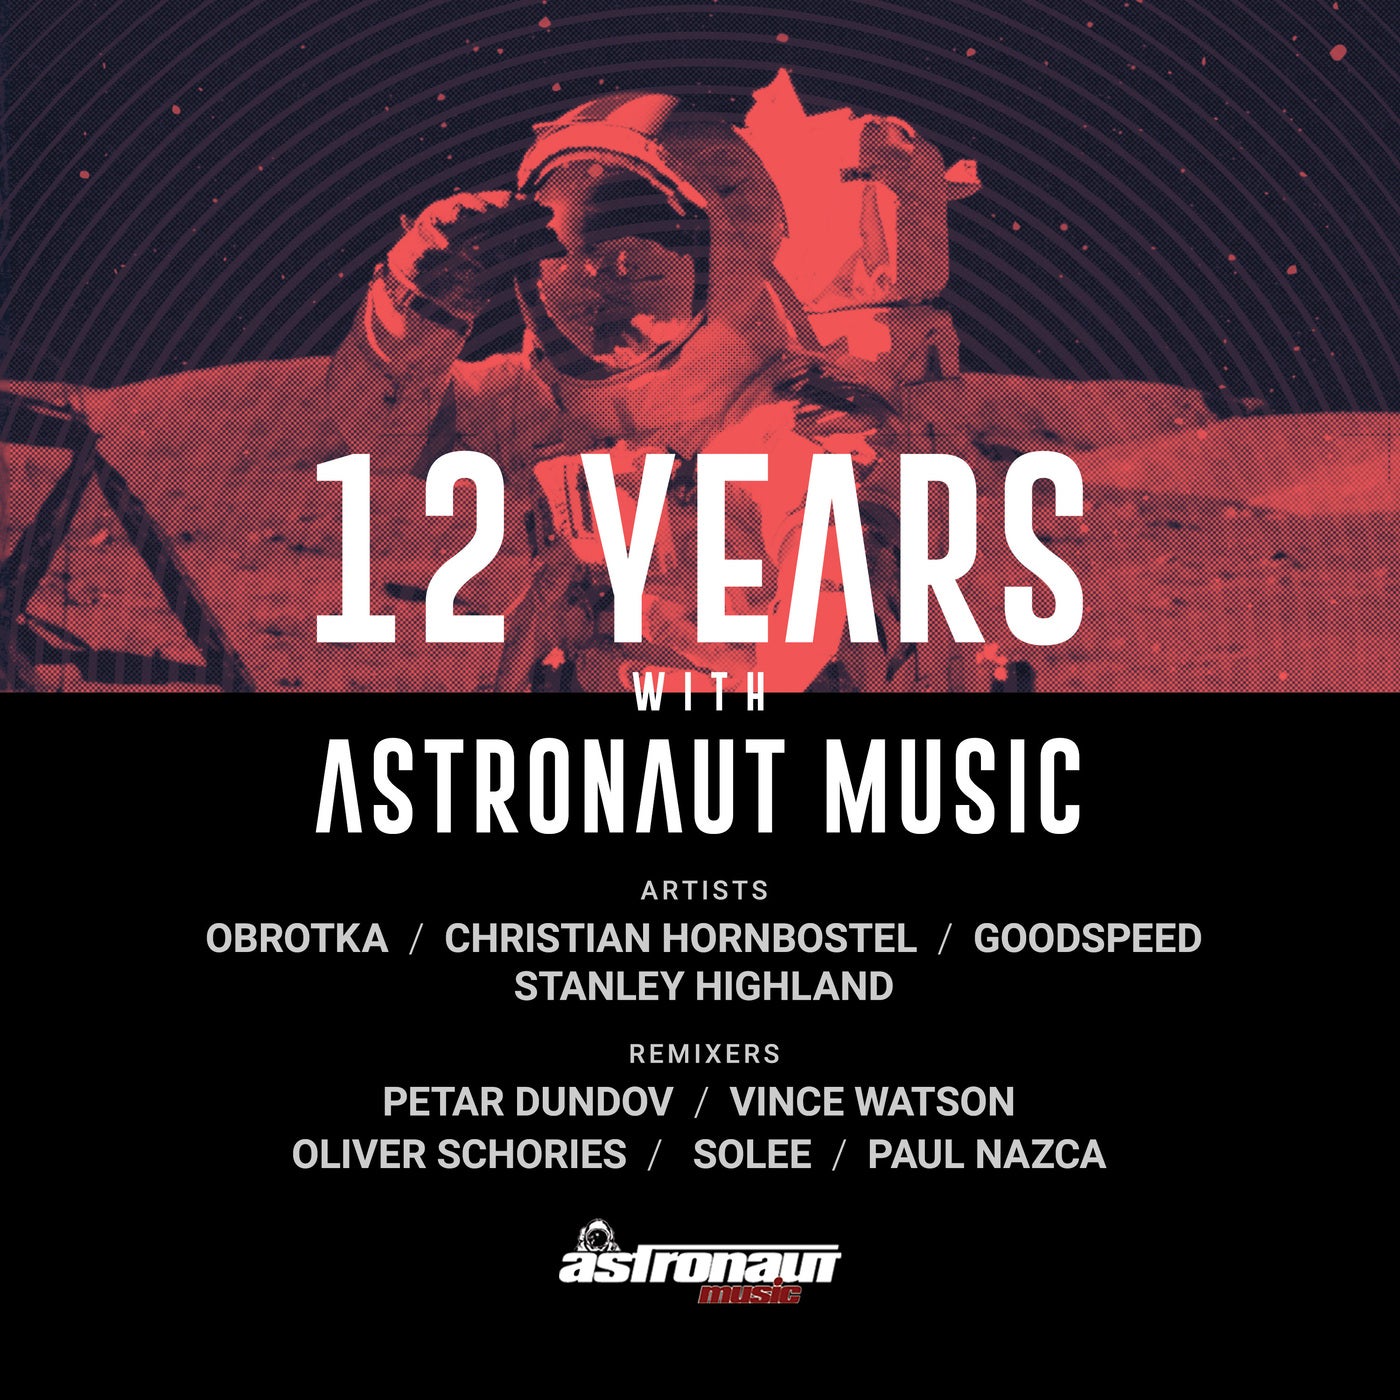 Download 12 Years with Astronaut Music on Electrobuzz